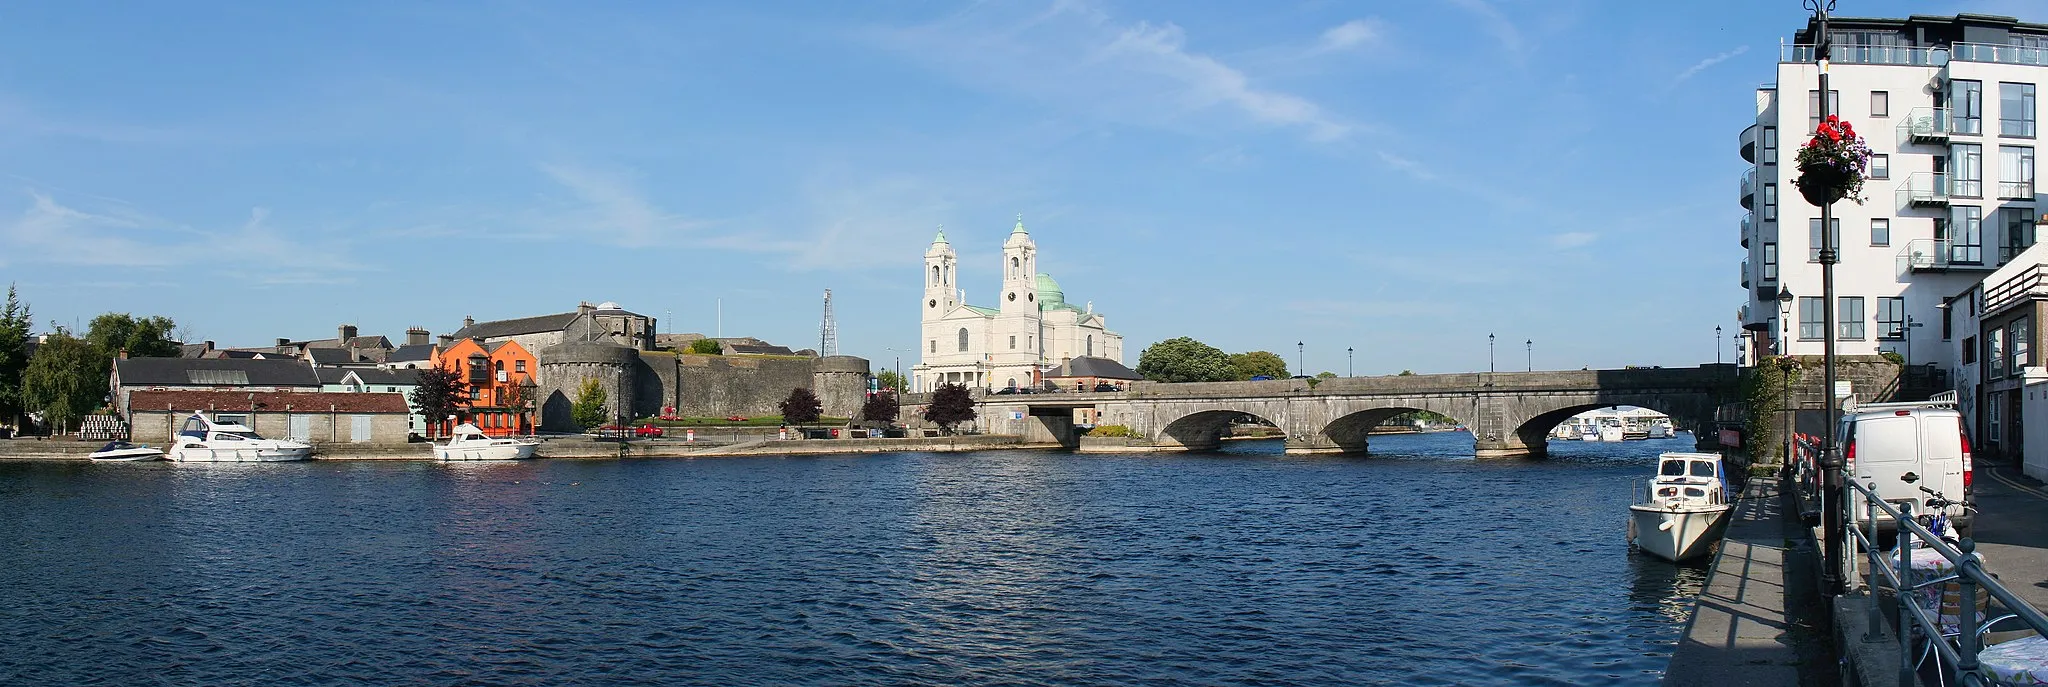 Photo showing: Athlone / Ireland - Castle, St Peter and Paul's Church, Bridge over the Shannon